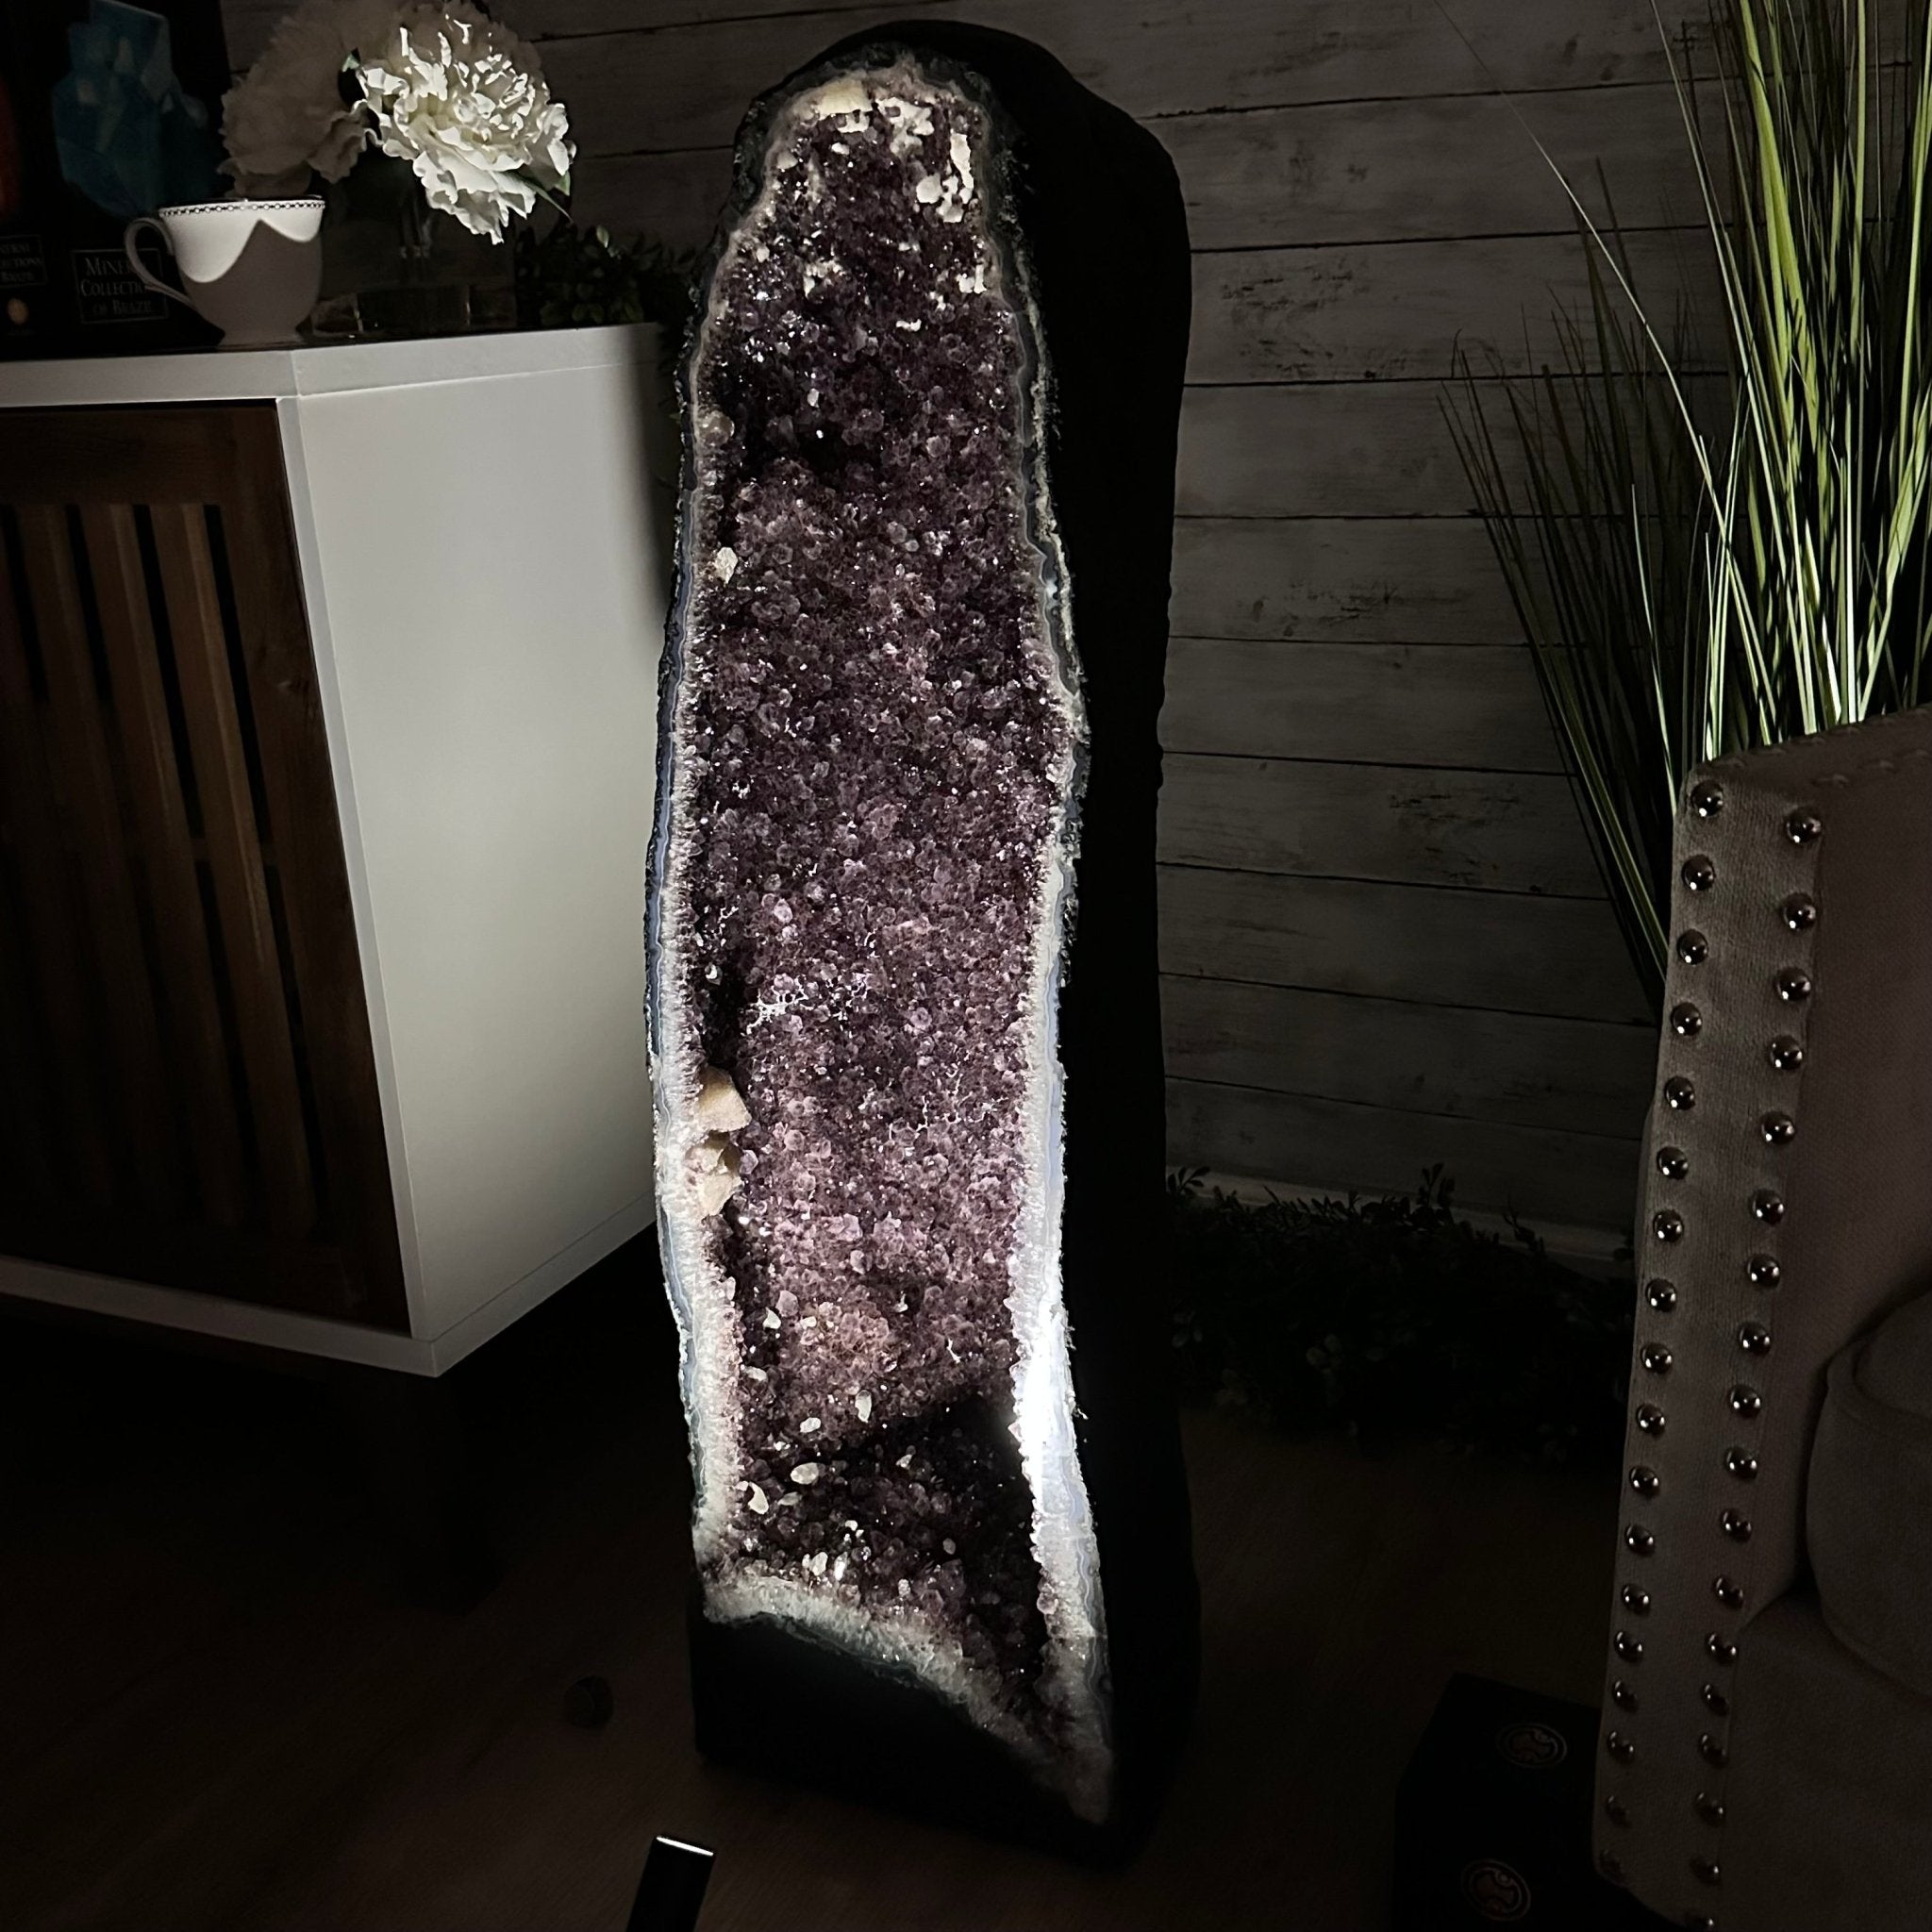 Extra Quality Brazilian Amethyst Cathedral, 131 lbs & 36" Tall #5601-1269 - Brazil GemsBrazil GemsExtra Quality Brazilian Amethyst Cathedral, 131 lbs & 36" Tall #5601-1269Cathedrals5601-1269